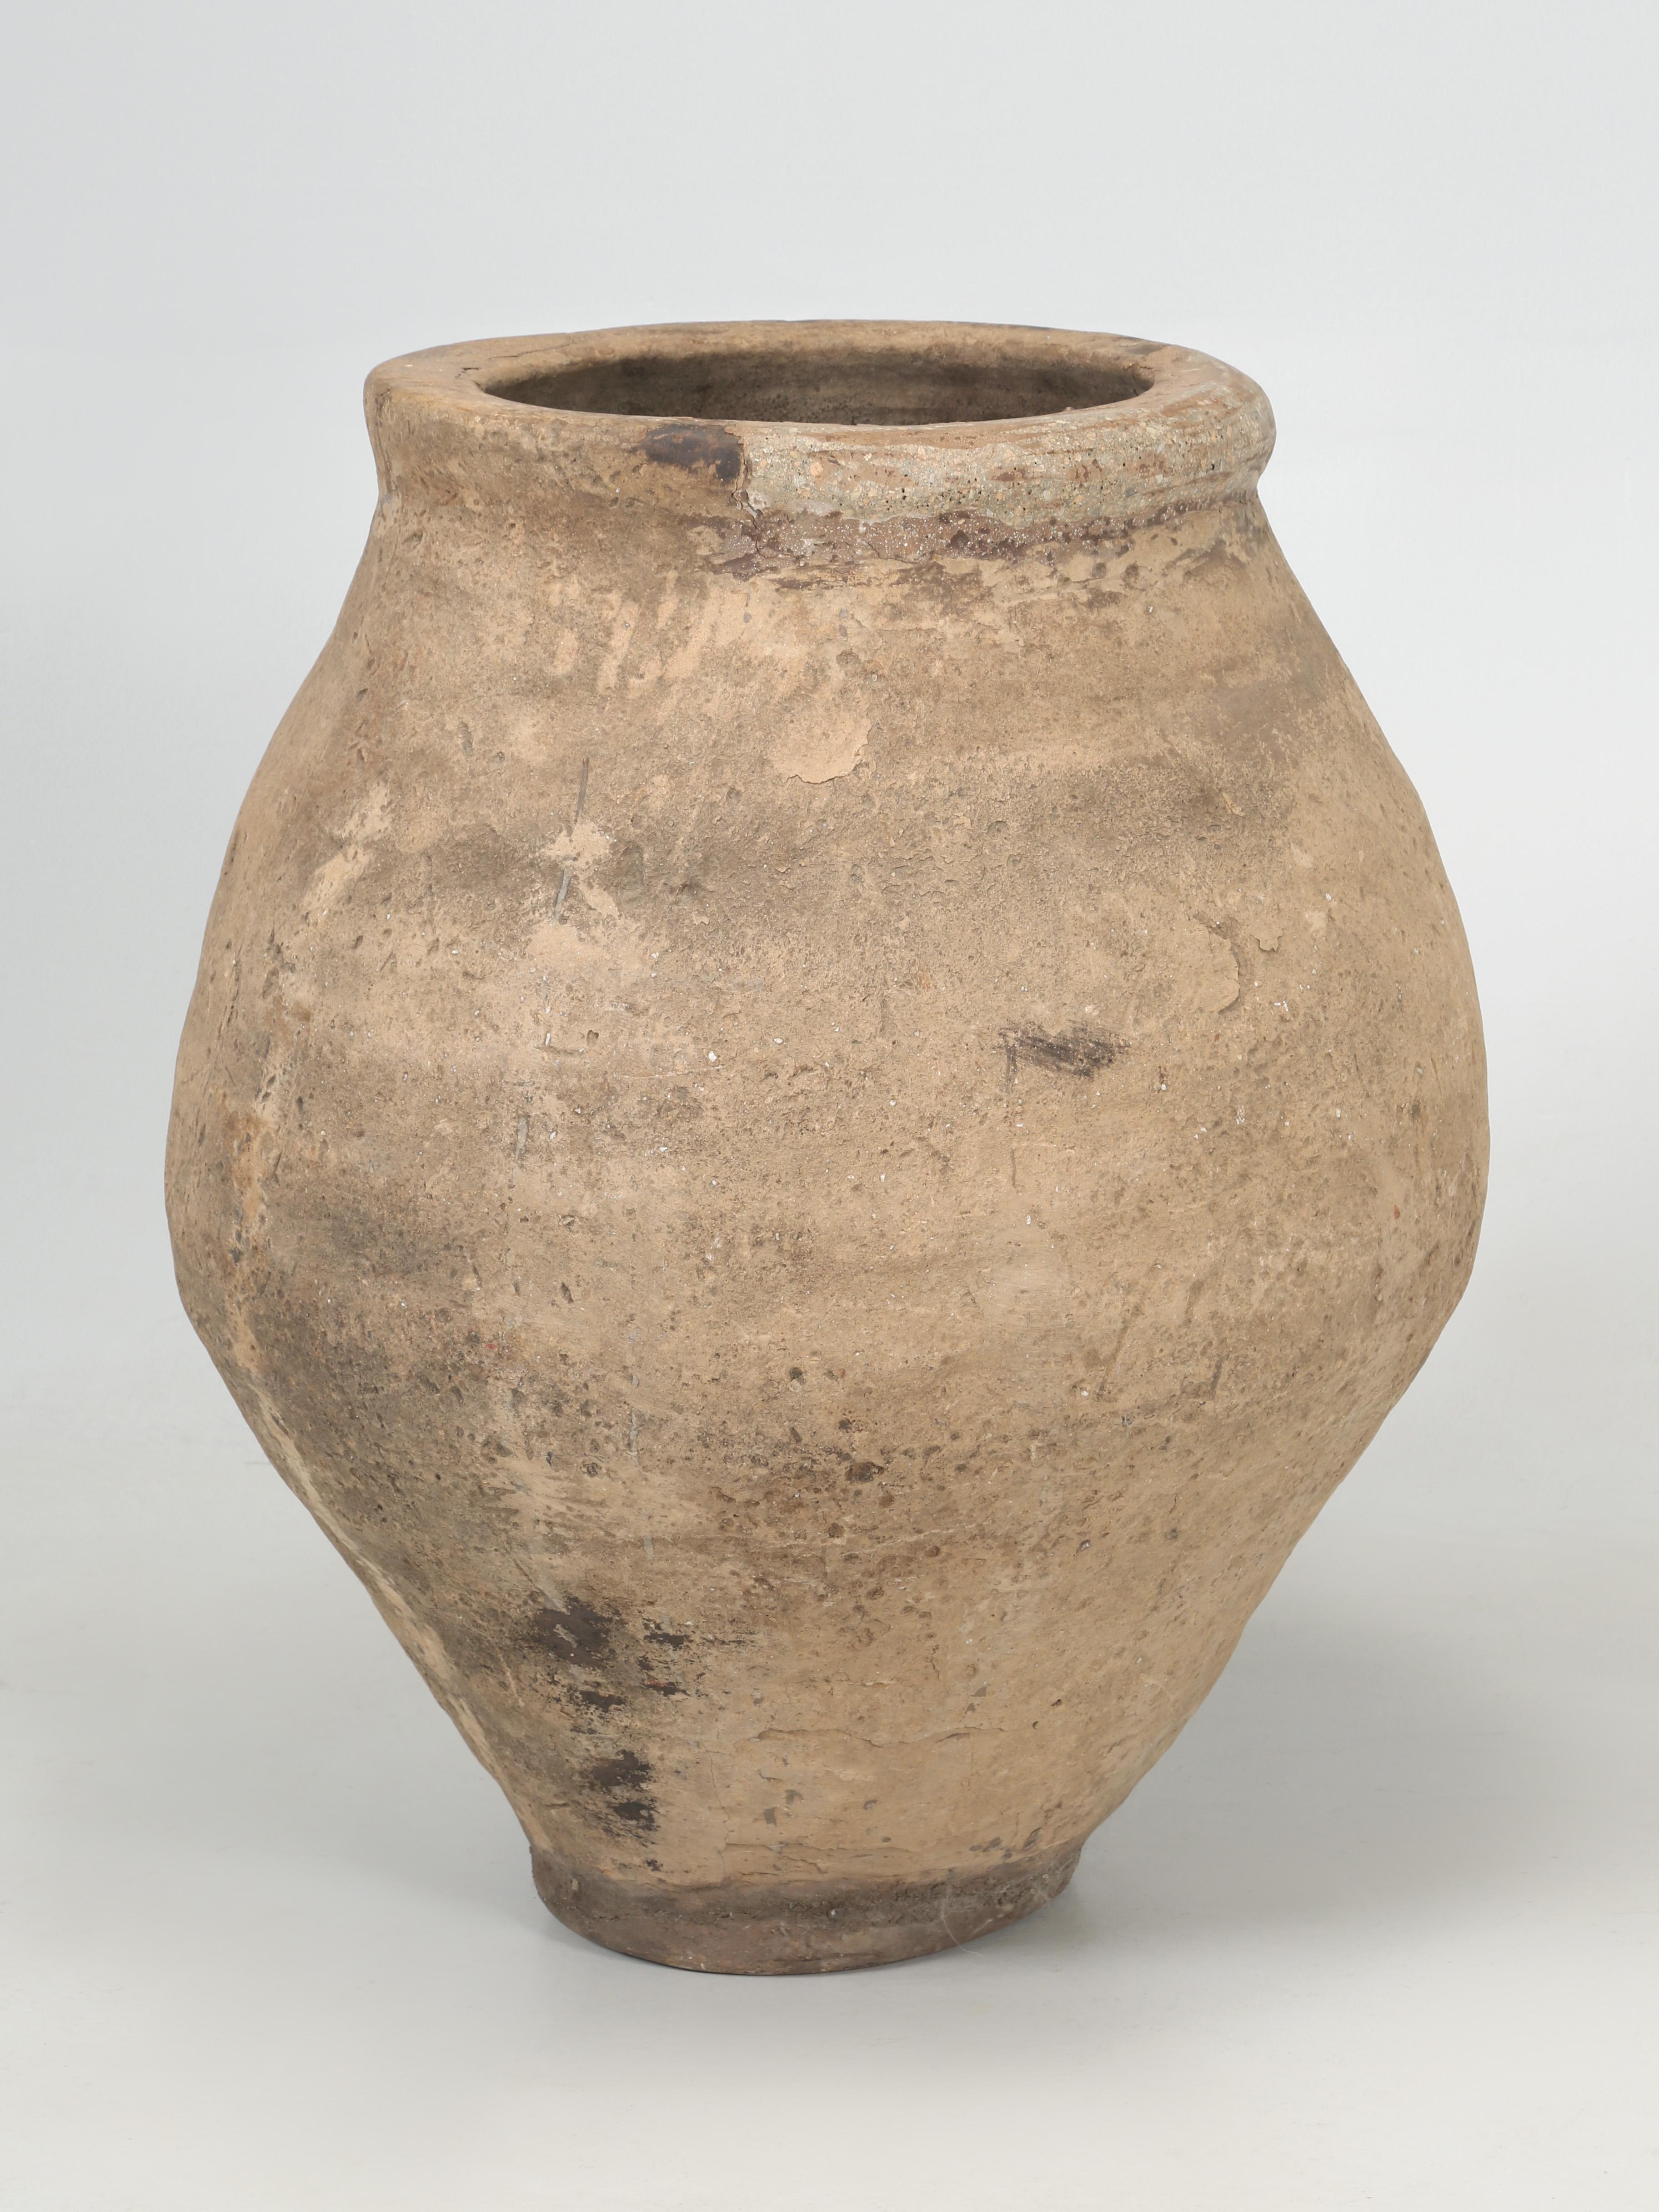 Antique clay pot, planter, or urn, which we would normally describe as terra-cotta, but we are not 100% positive our large planter is actually terra-cotta. The planter/urn is made from a clay that had quite a bit of small rock with the clay and